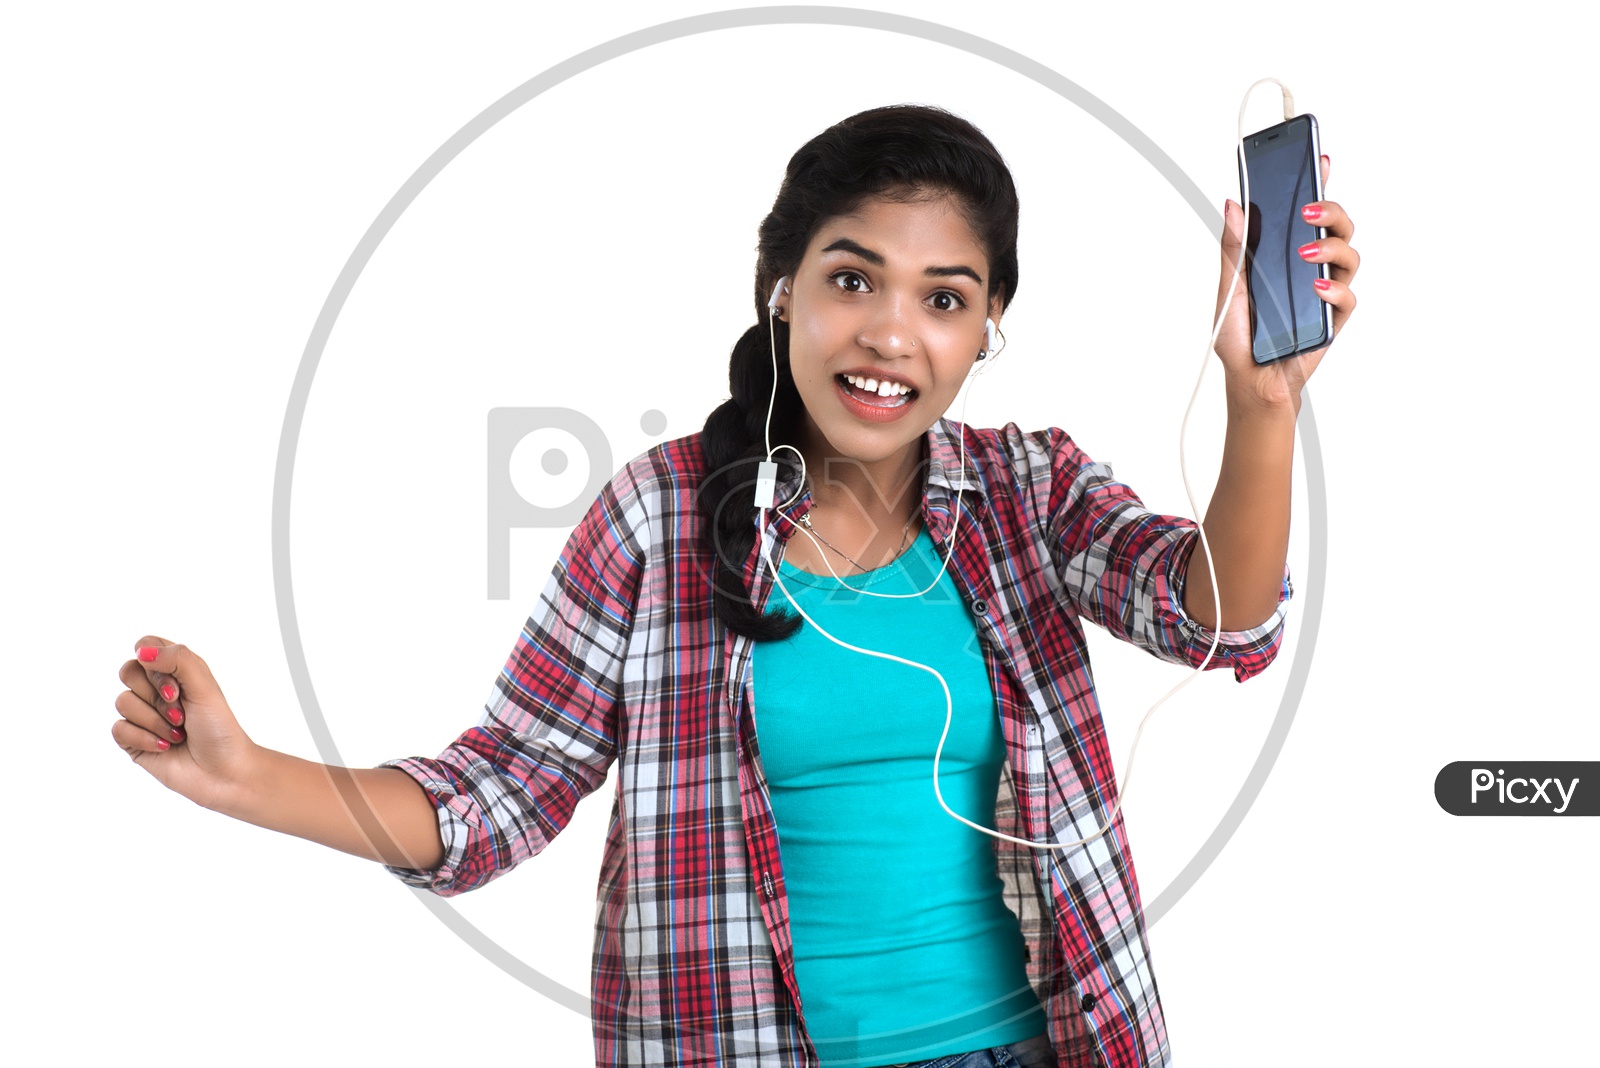 A Pretty Indian Young Girl Making Video Call on her Smart Phone With an Expression on an isolated White Background